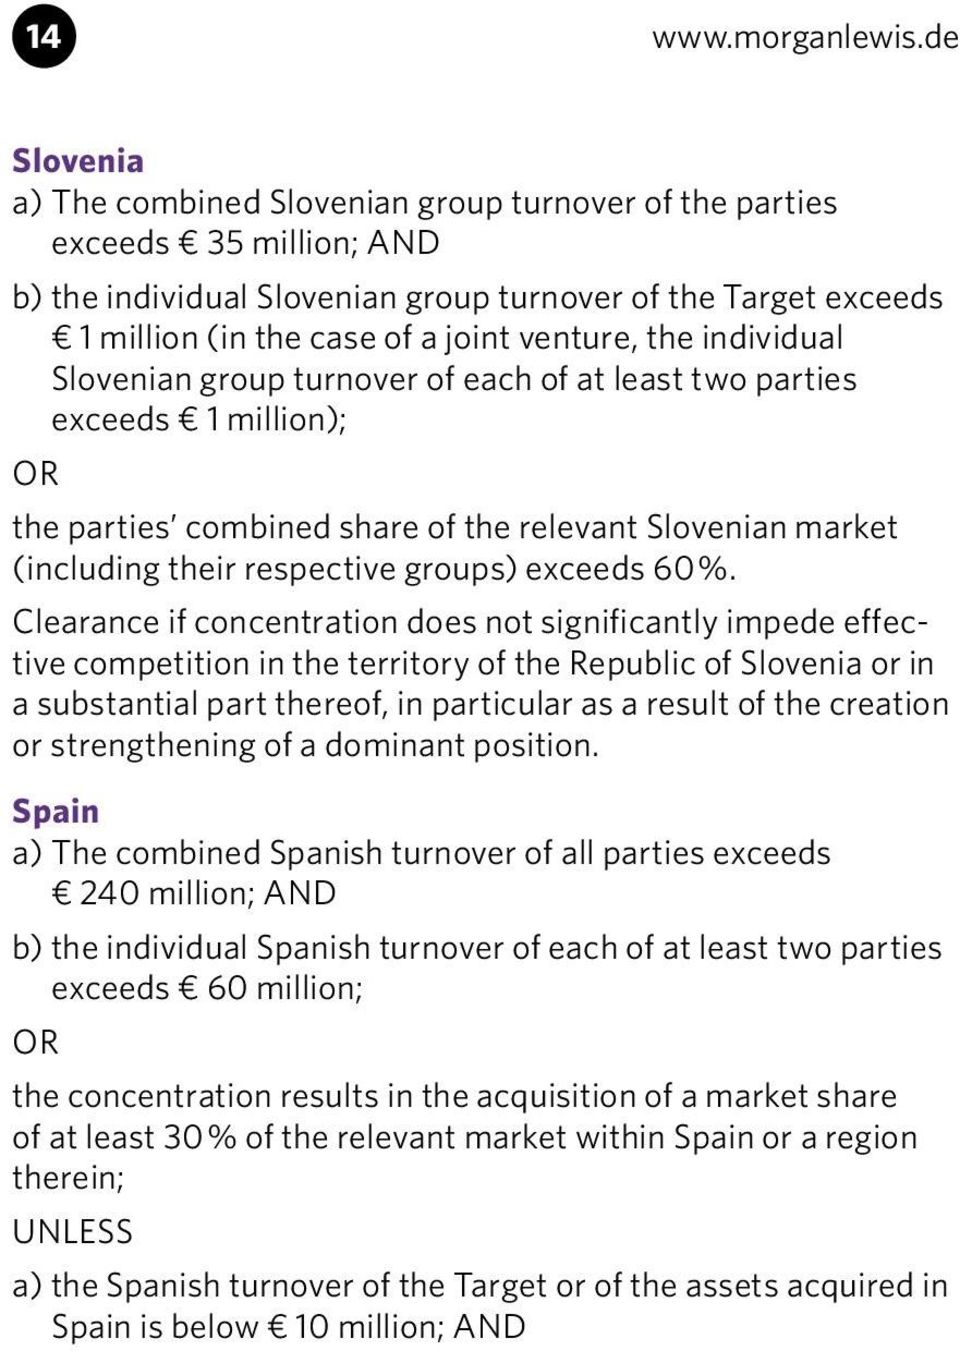 the individual Slovenian group turnover of each of at least two parties exceeds 1 million); the parties combined share of the relevant Slovenian market (including their respective groups) exceeds 60%.